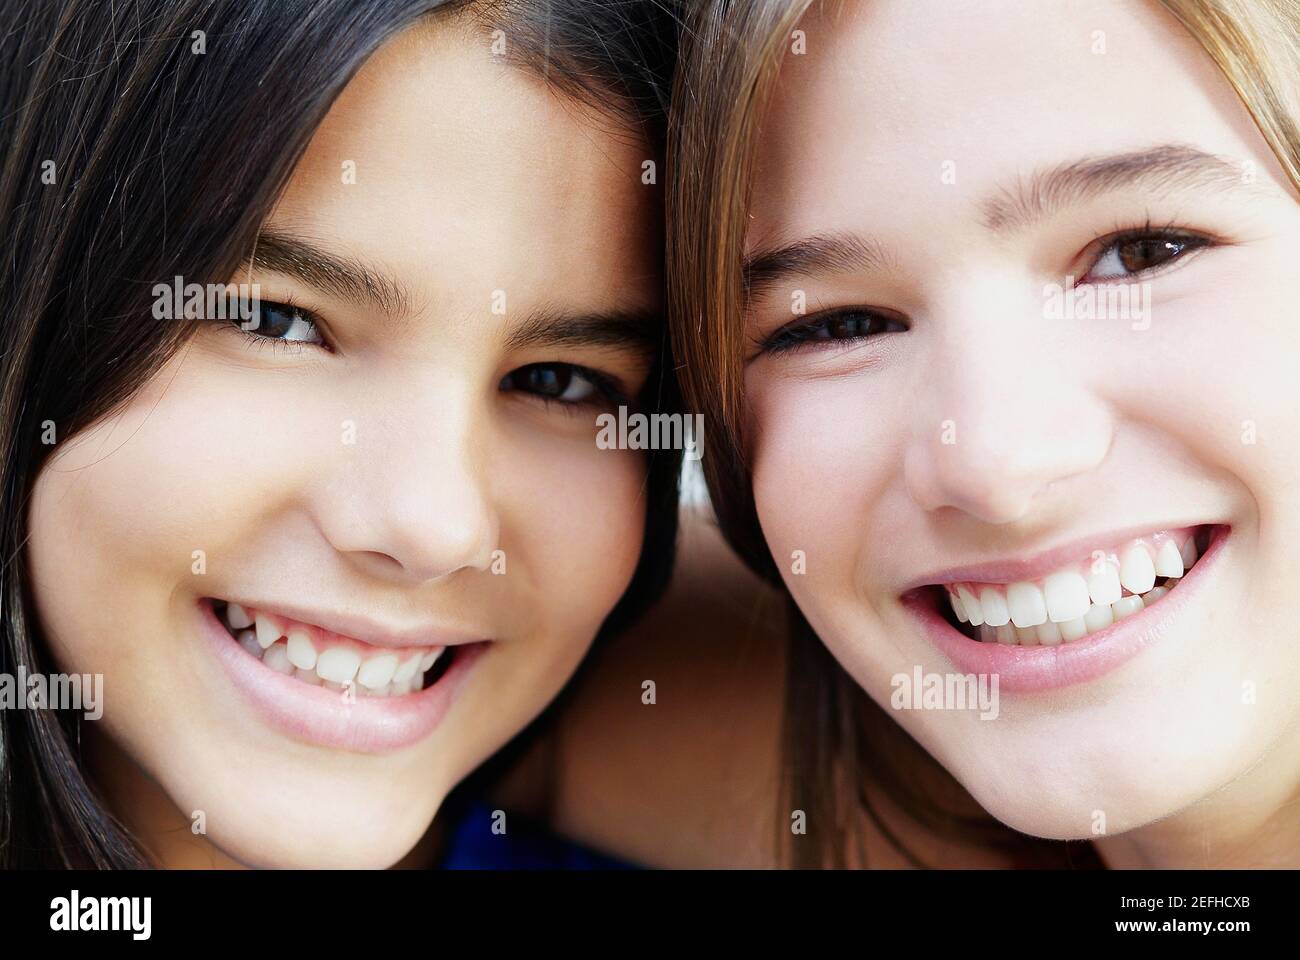 Portrait of two girls smiling Stock Photo